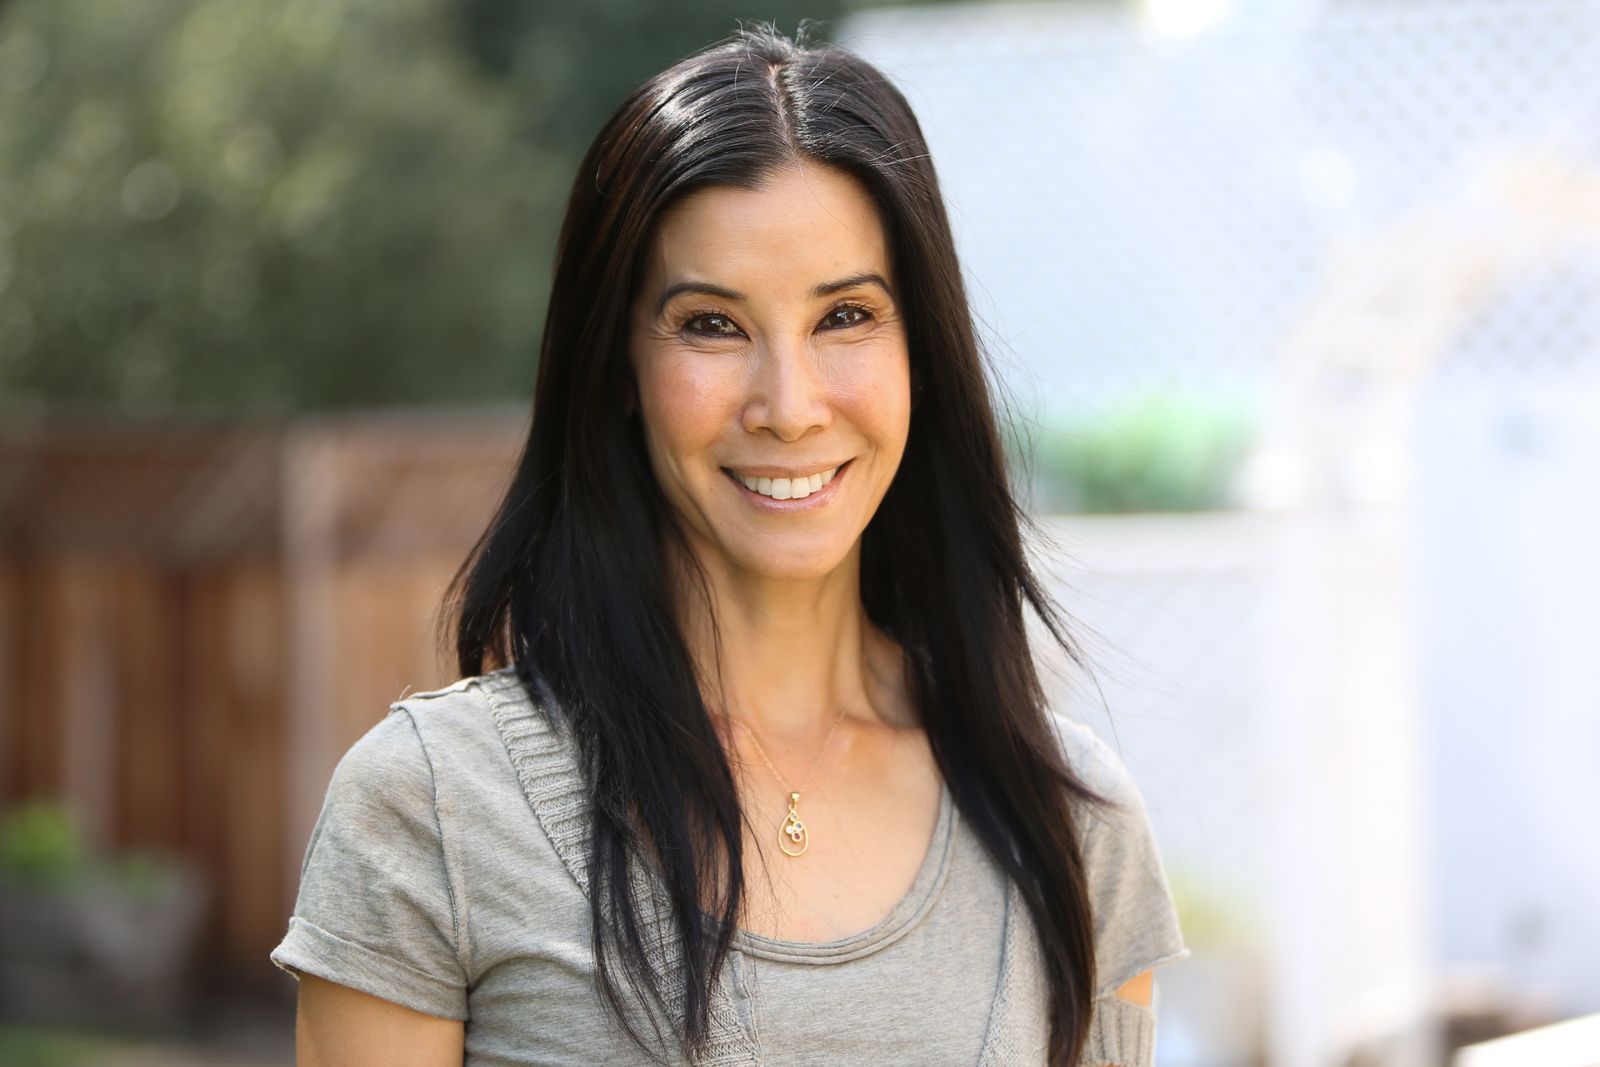 Lisa Ling on a visit to Hallmark's "Home & Family" at Universal Studios Hollywood in 2019  | Source: Getty Images